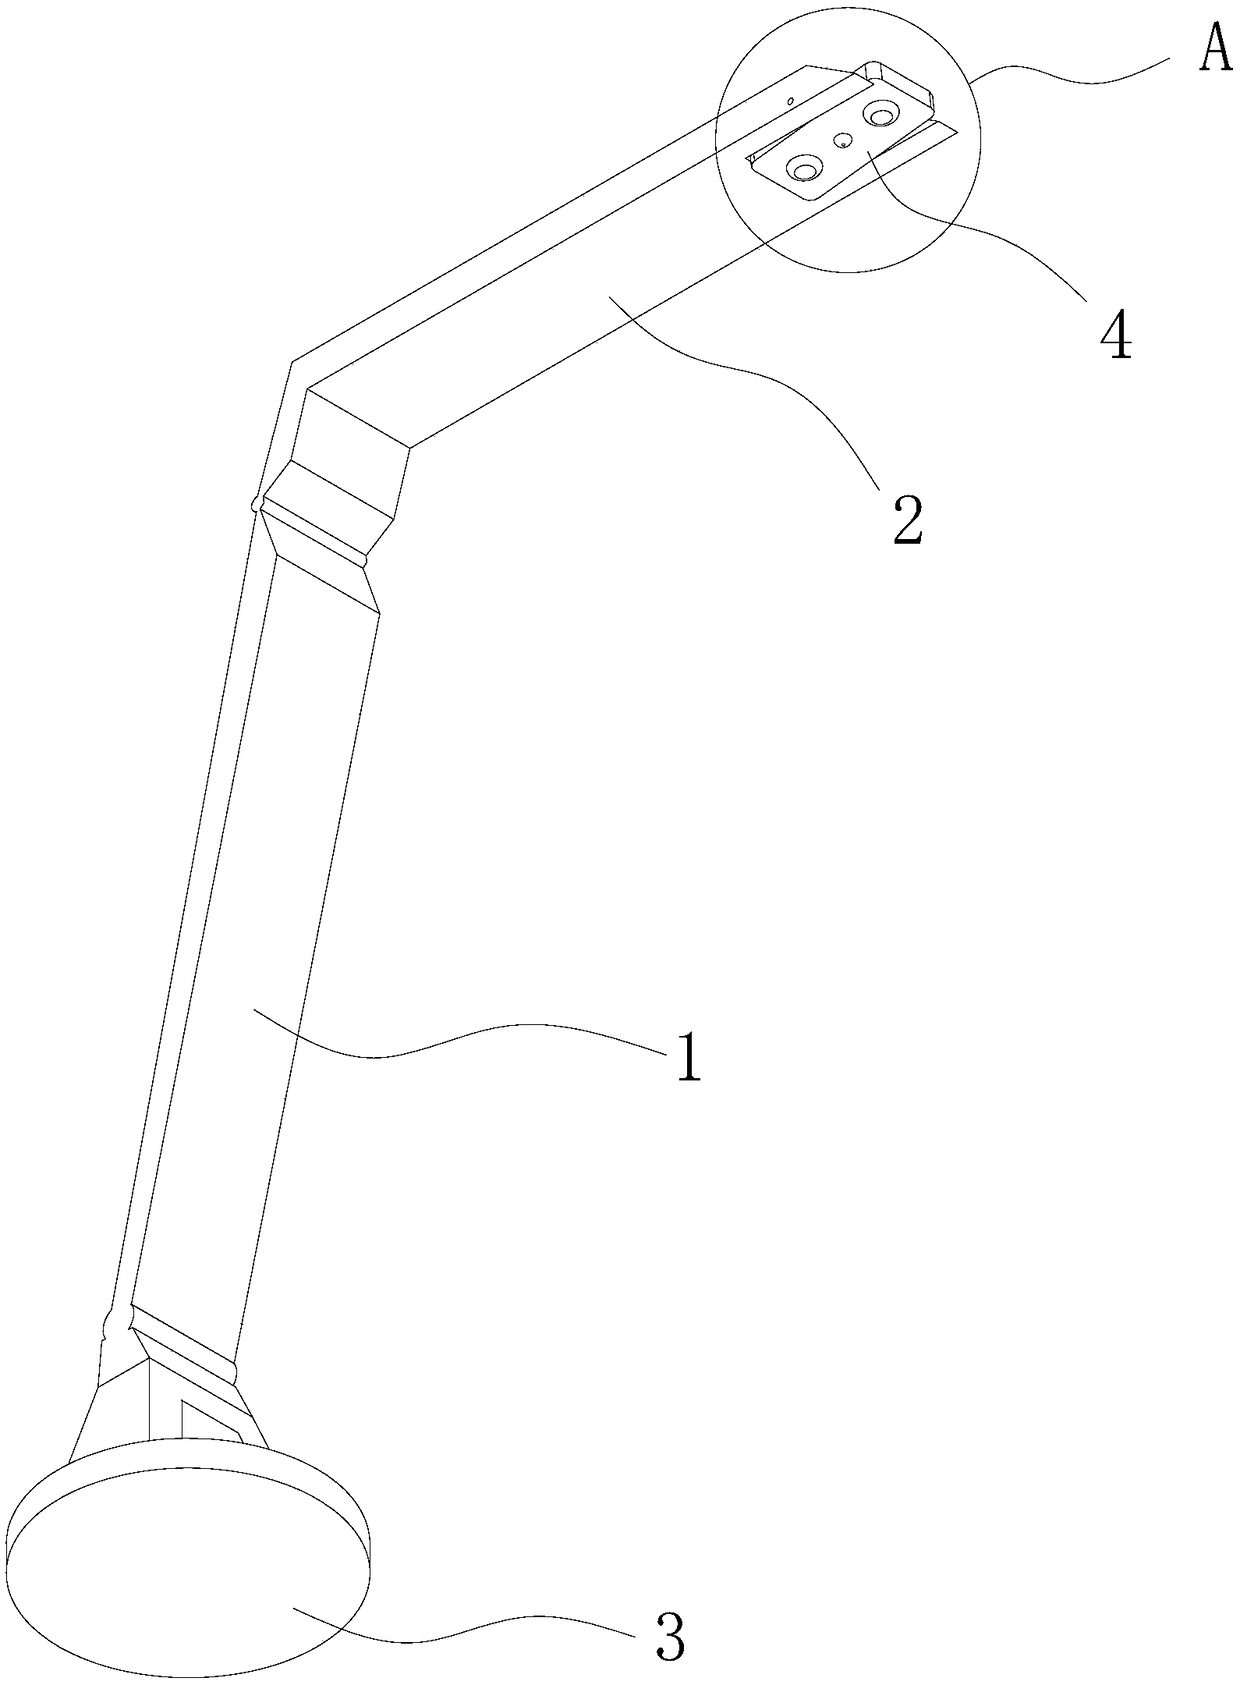 A cardiopulmonary resuscitation assisting device and a compression depth measurement method